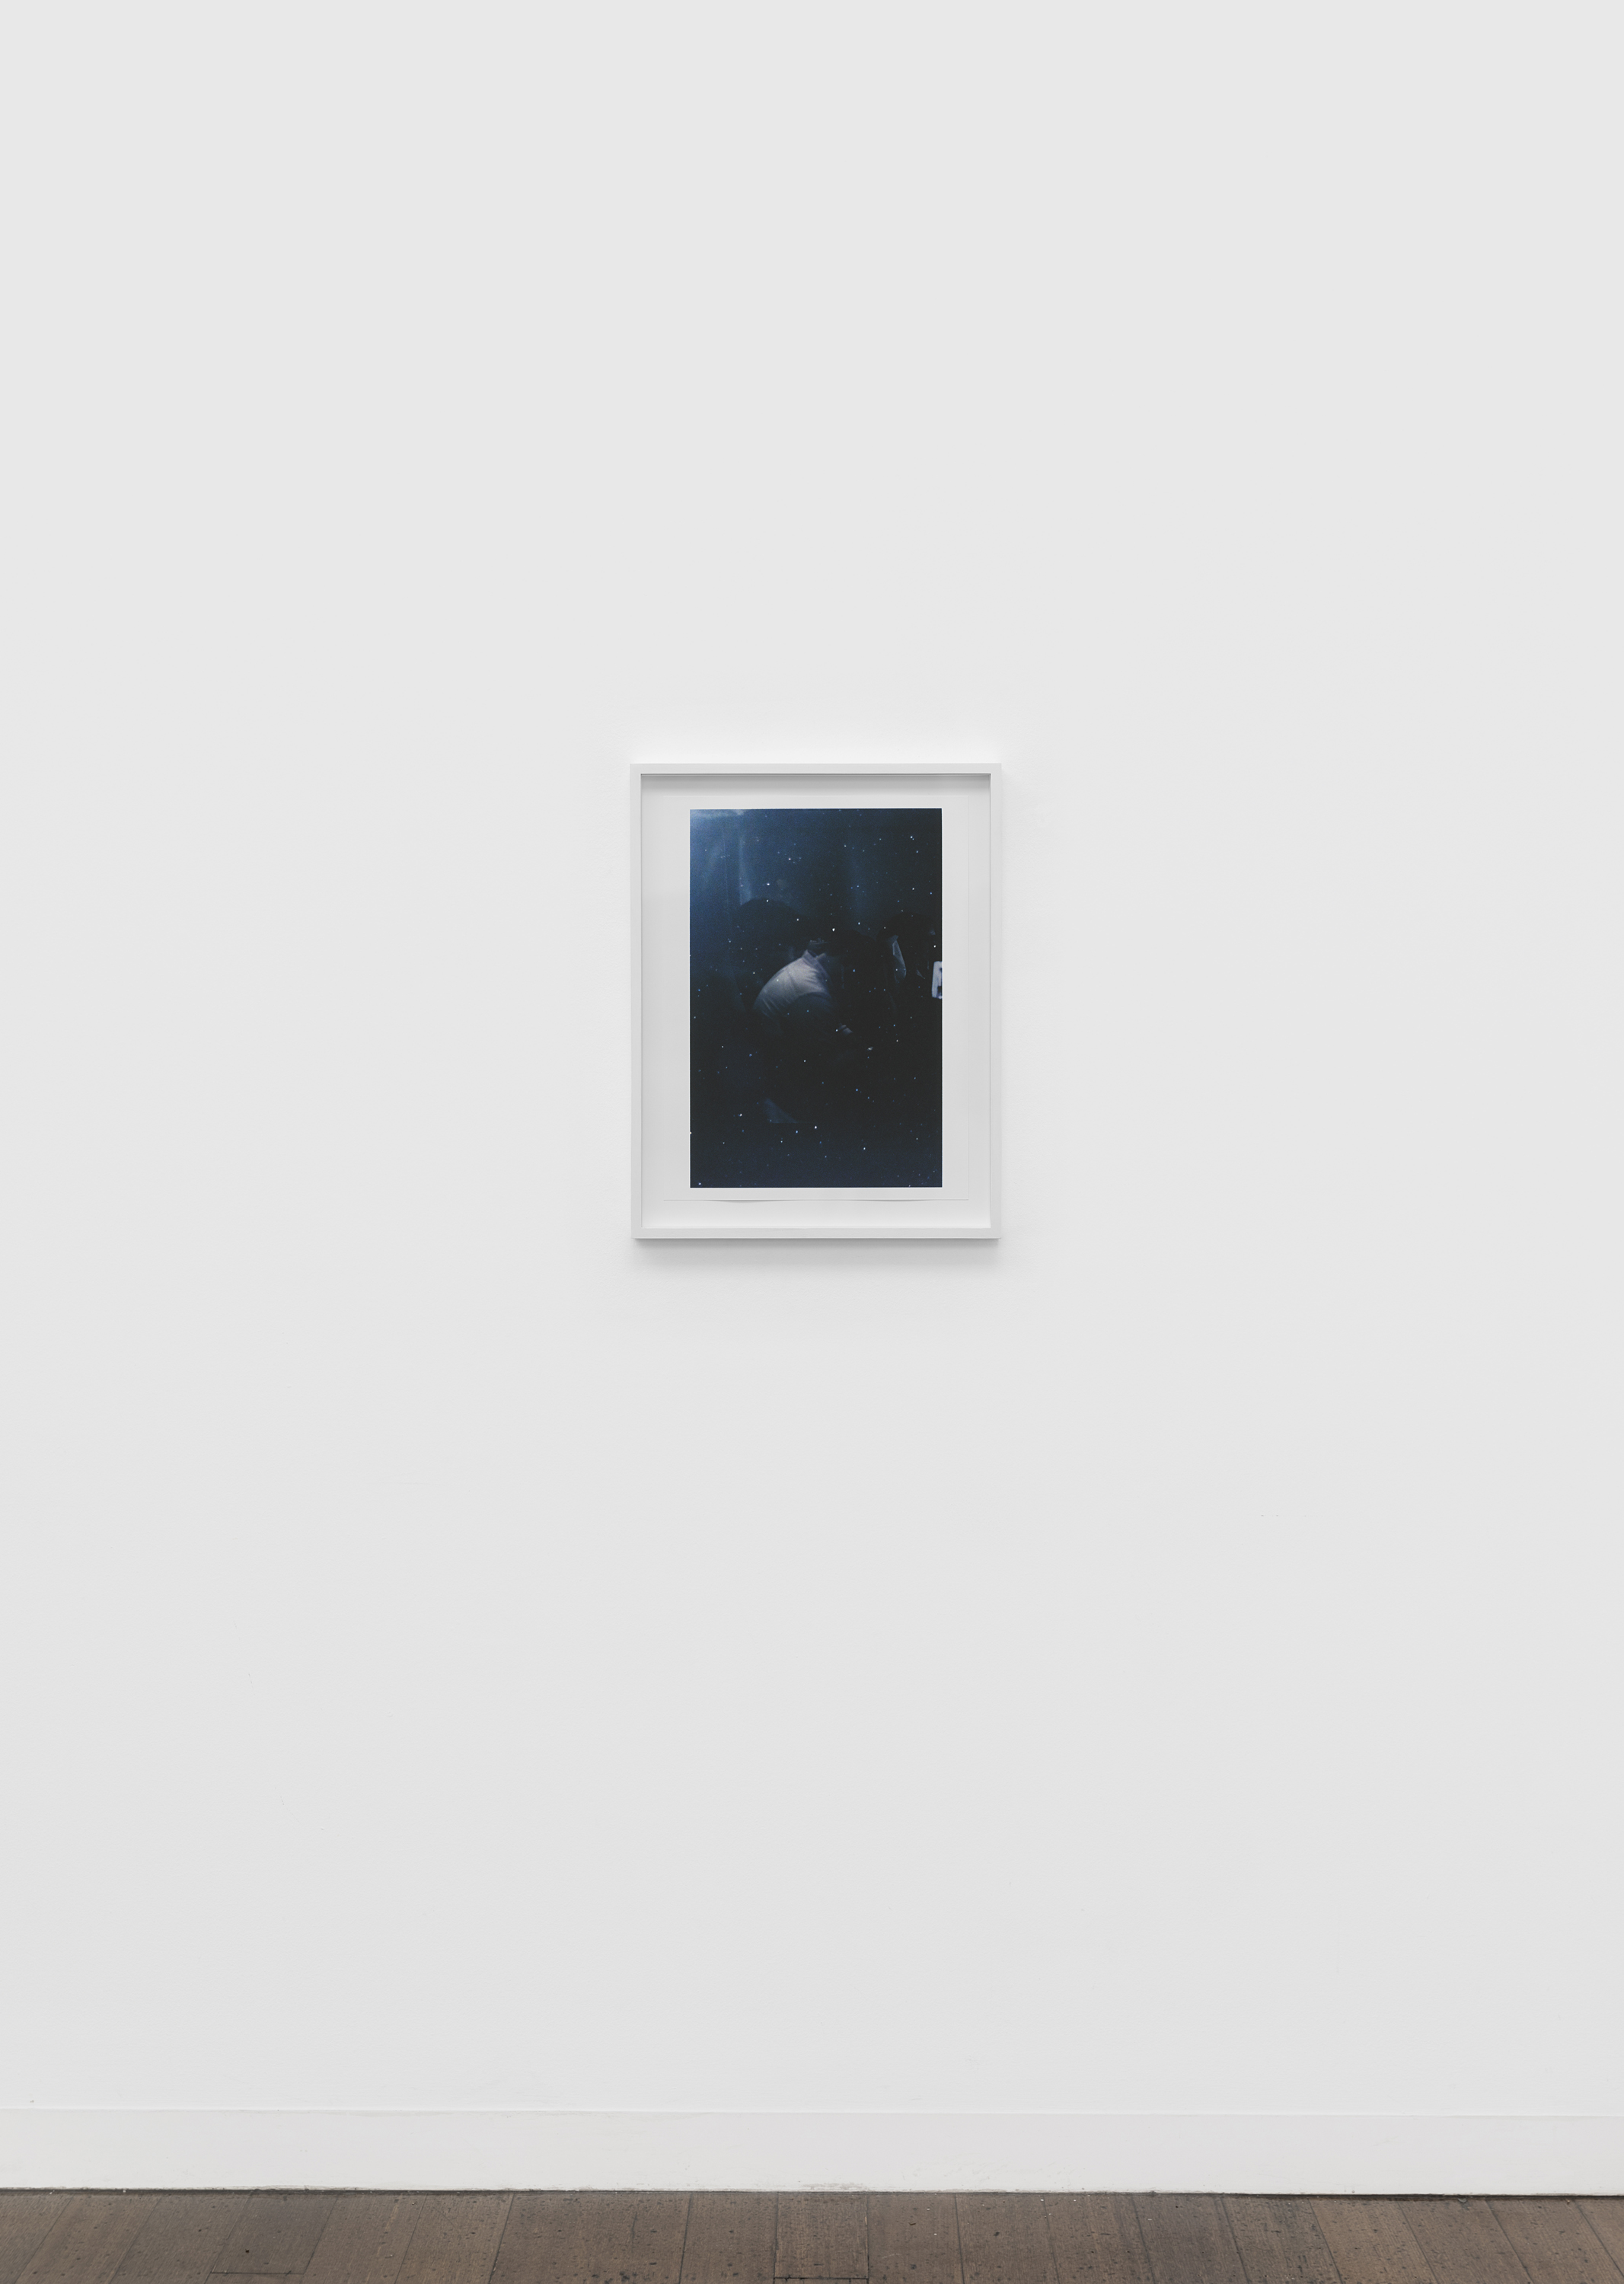   Untitled (figure, glass, stars) , pigment print on paper, sheet: 48.8 × 36.7 cm (19 1/4 × 14 1/2 in), framed: 56.3 × 47.1 cm (22 1/8 × 18 1/2 in), 2019  Installation view of “the sacredness of something” at Arc One Gallery, Melbourne (2019) 